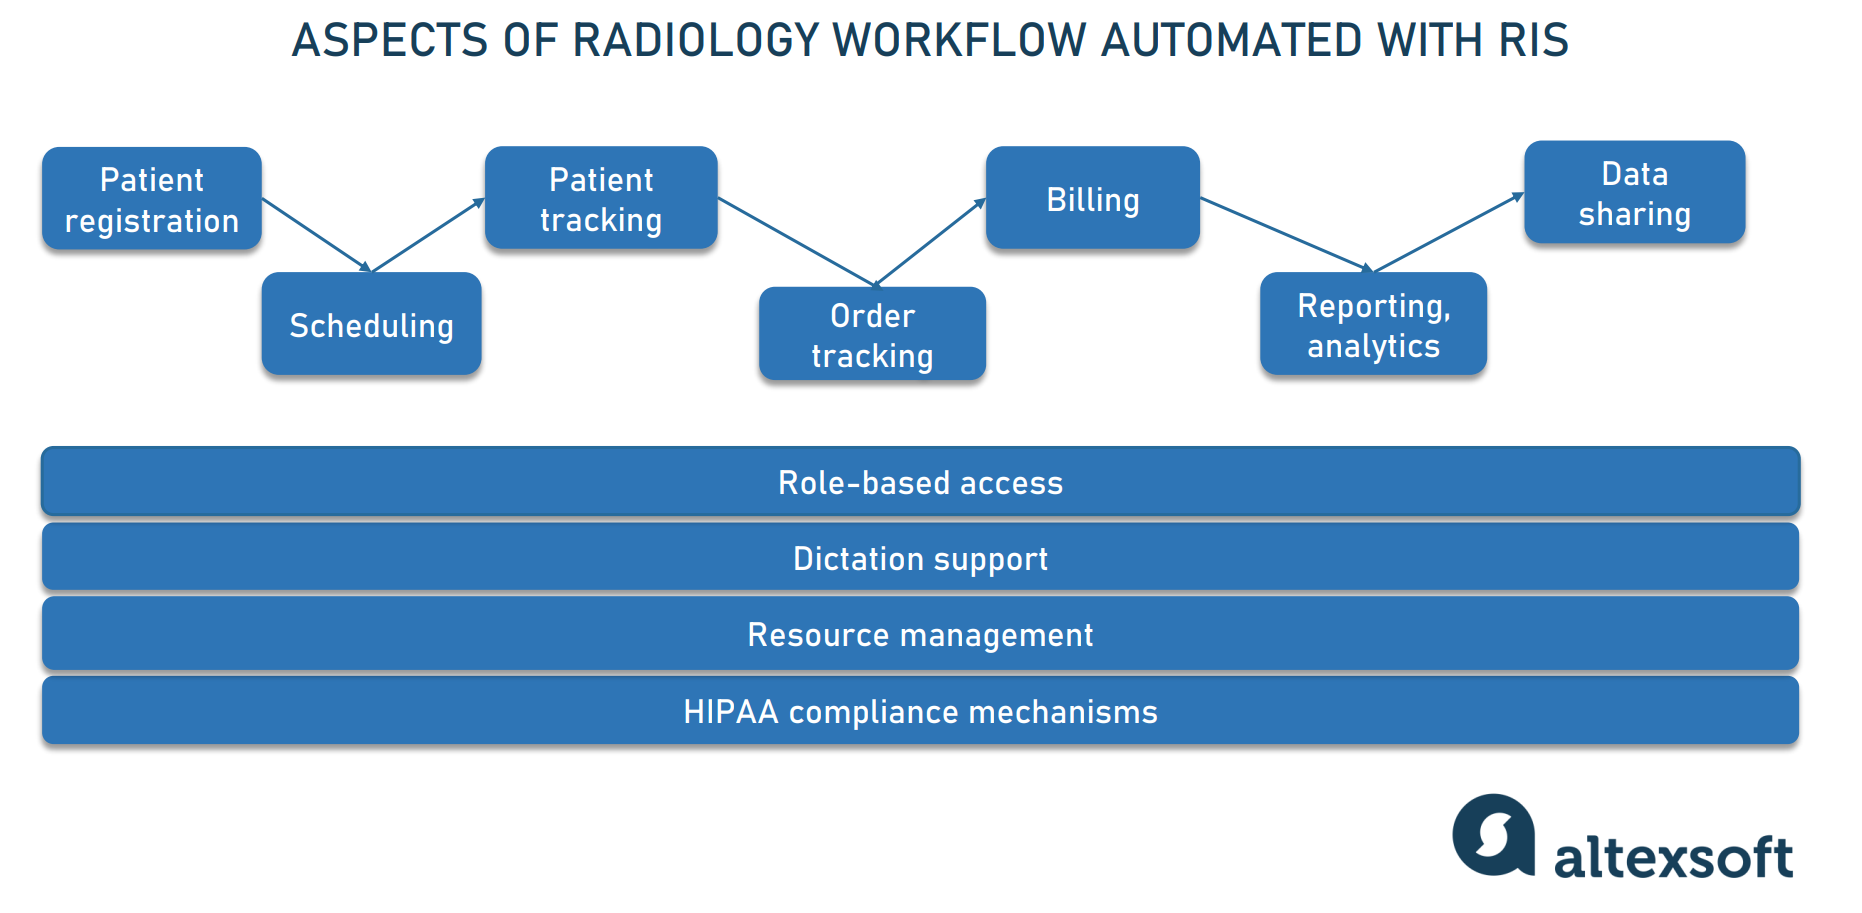 Radiology Information System functions